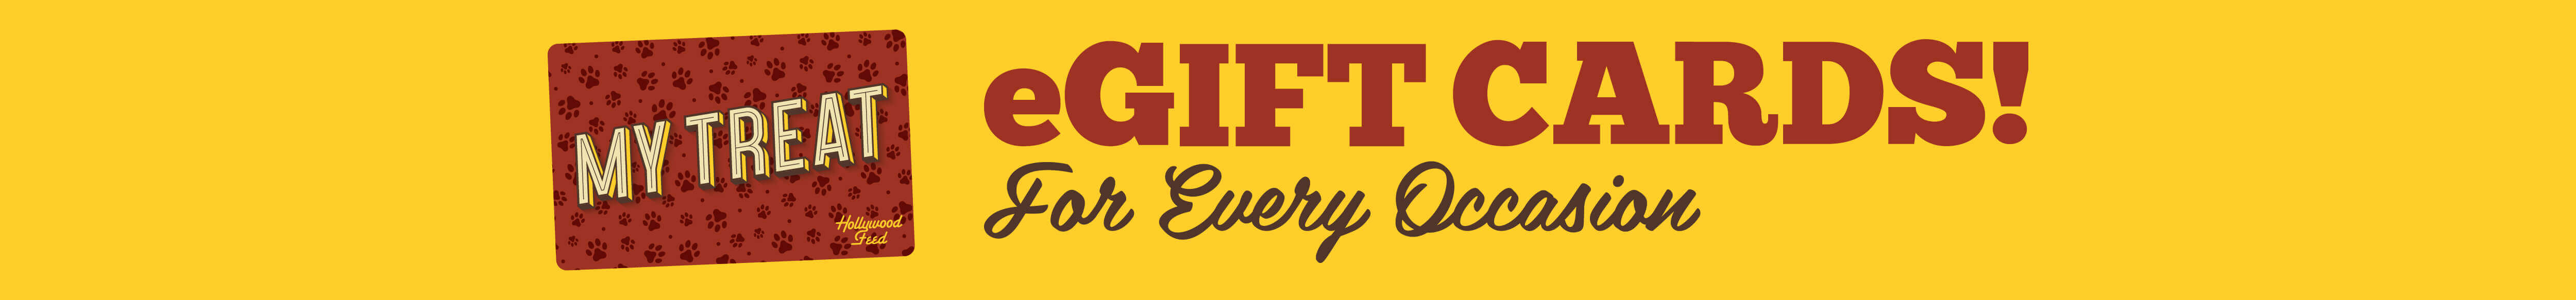 Hollywood Feed Egift Cards for every occasion - click to see the gift card page